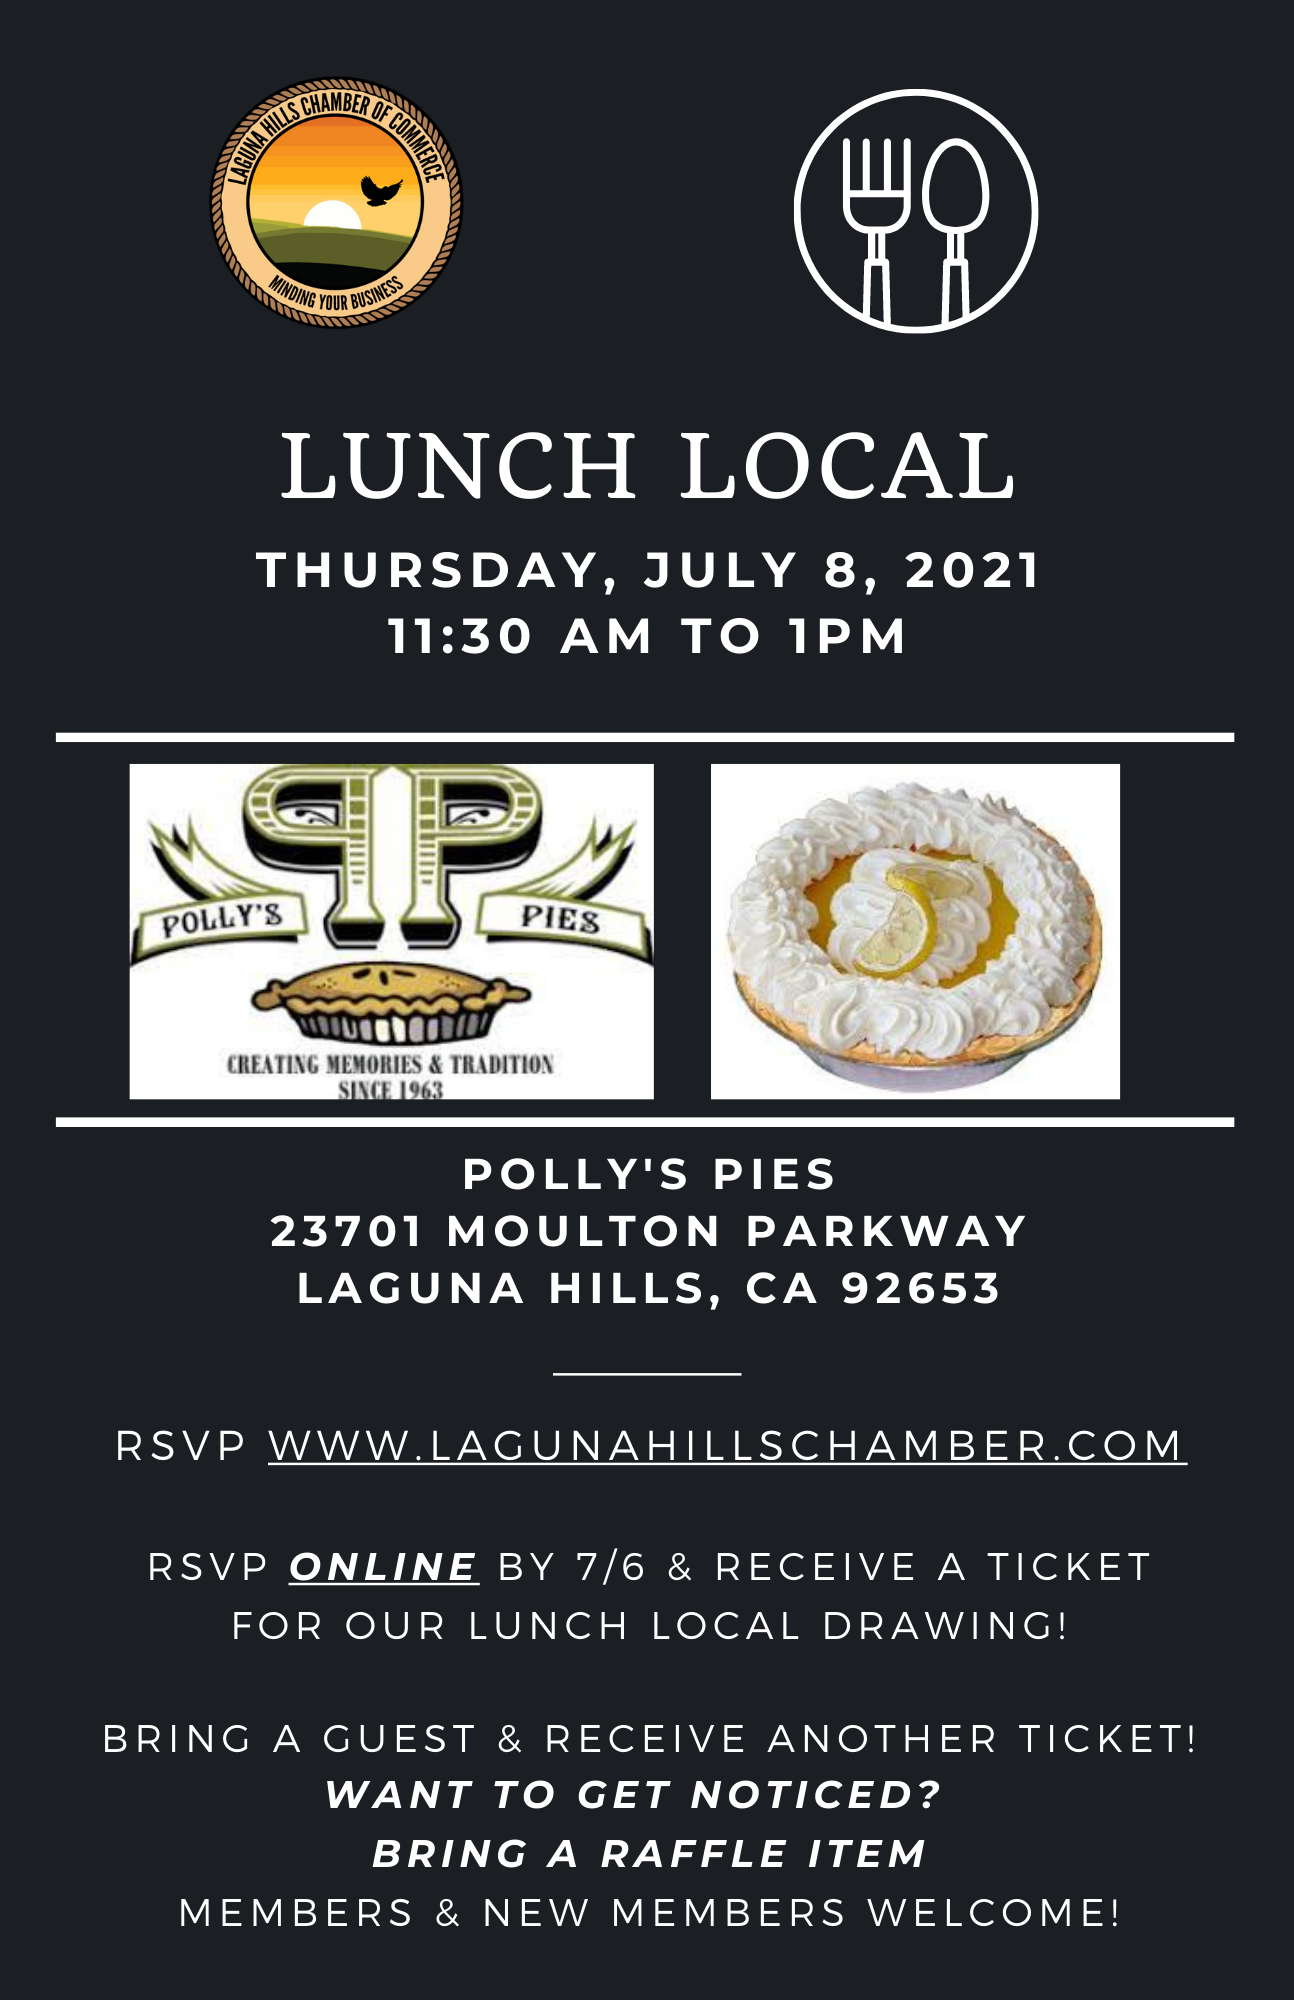 Lunch Local - Polly's Pies - Laguna Hills Chamber of Commerce